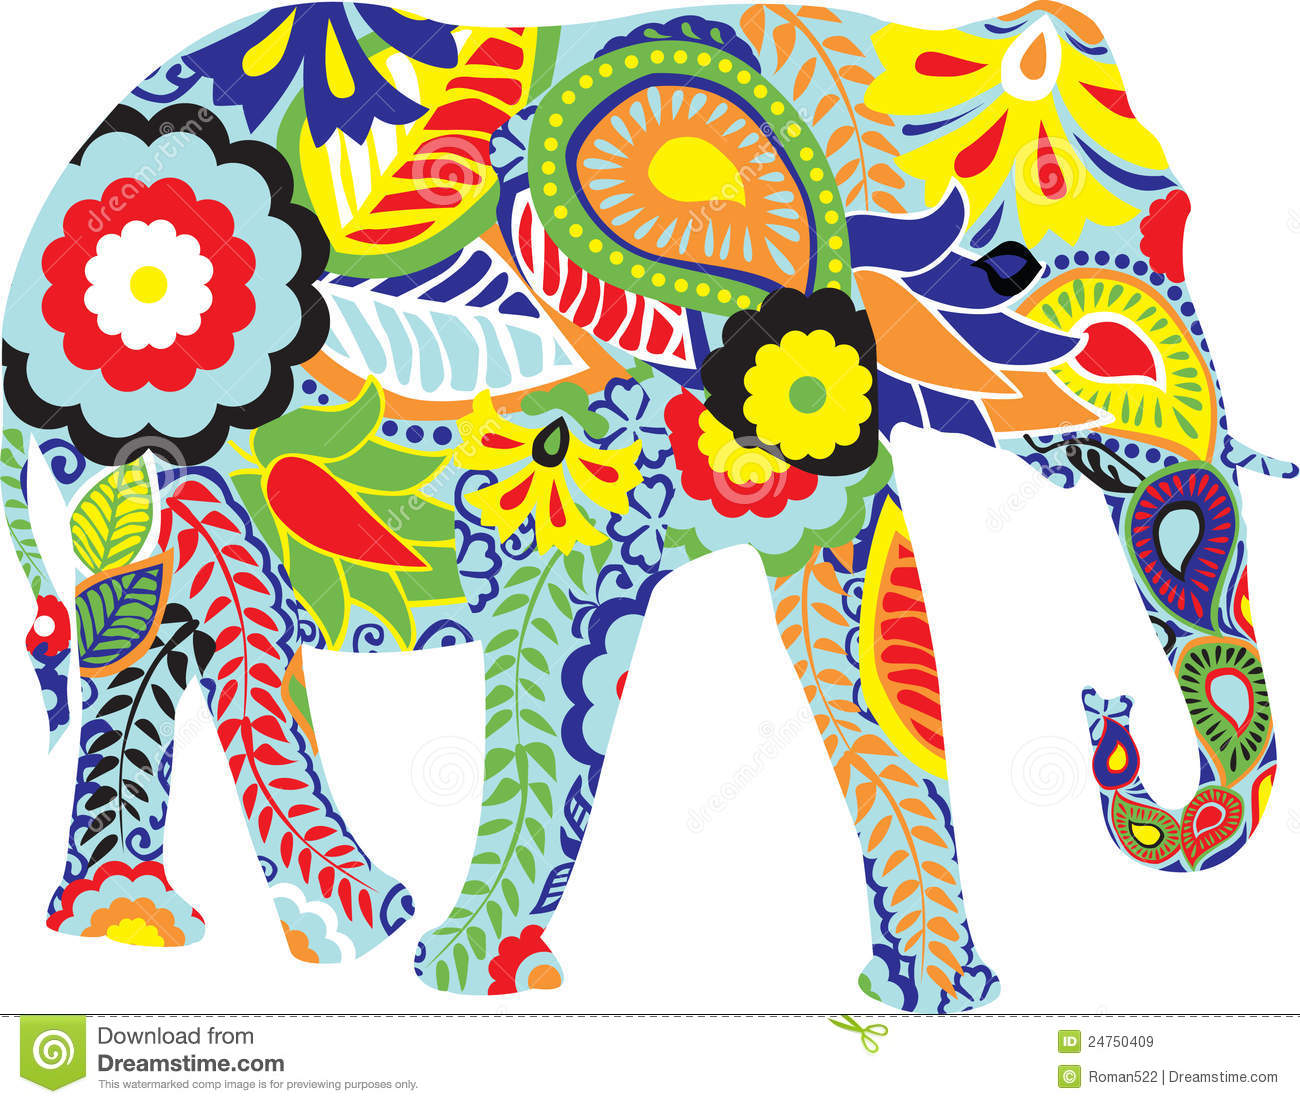 Silhouette Of An Elephant With Indian Designs Royalty Free Stock